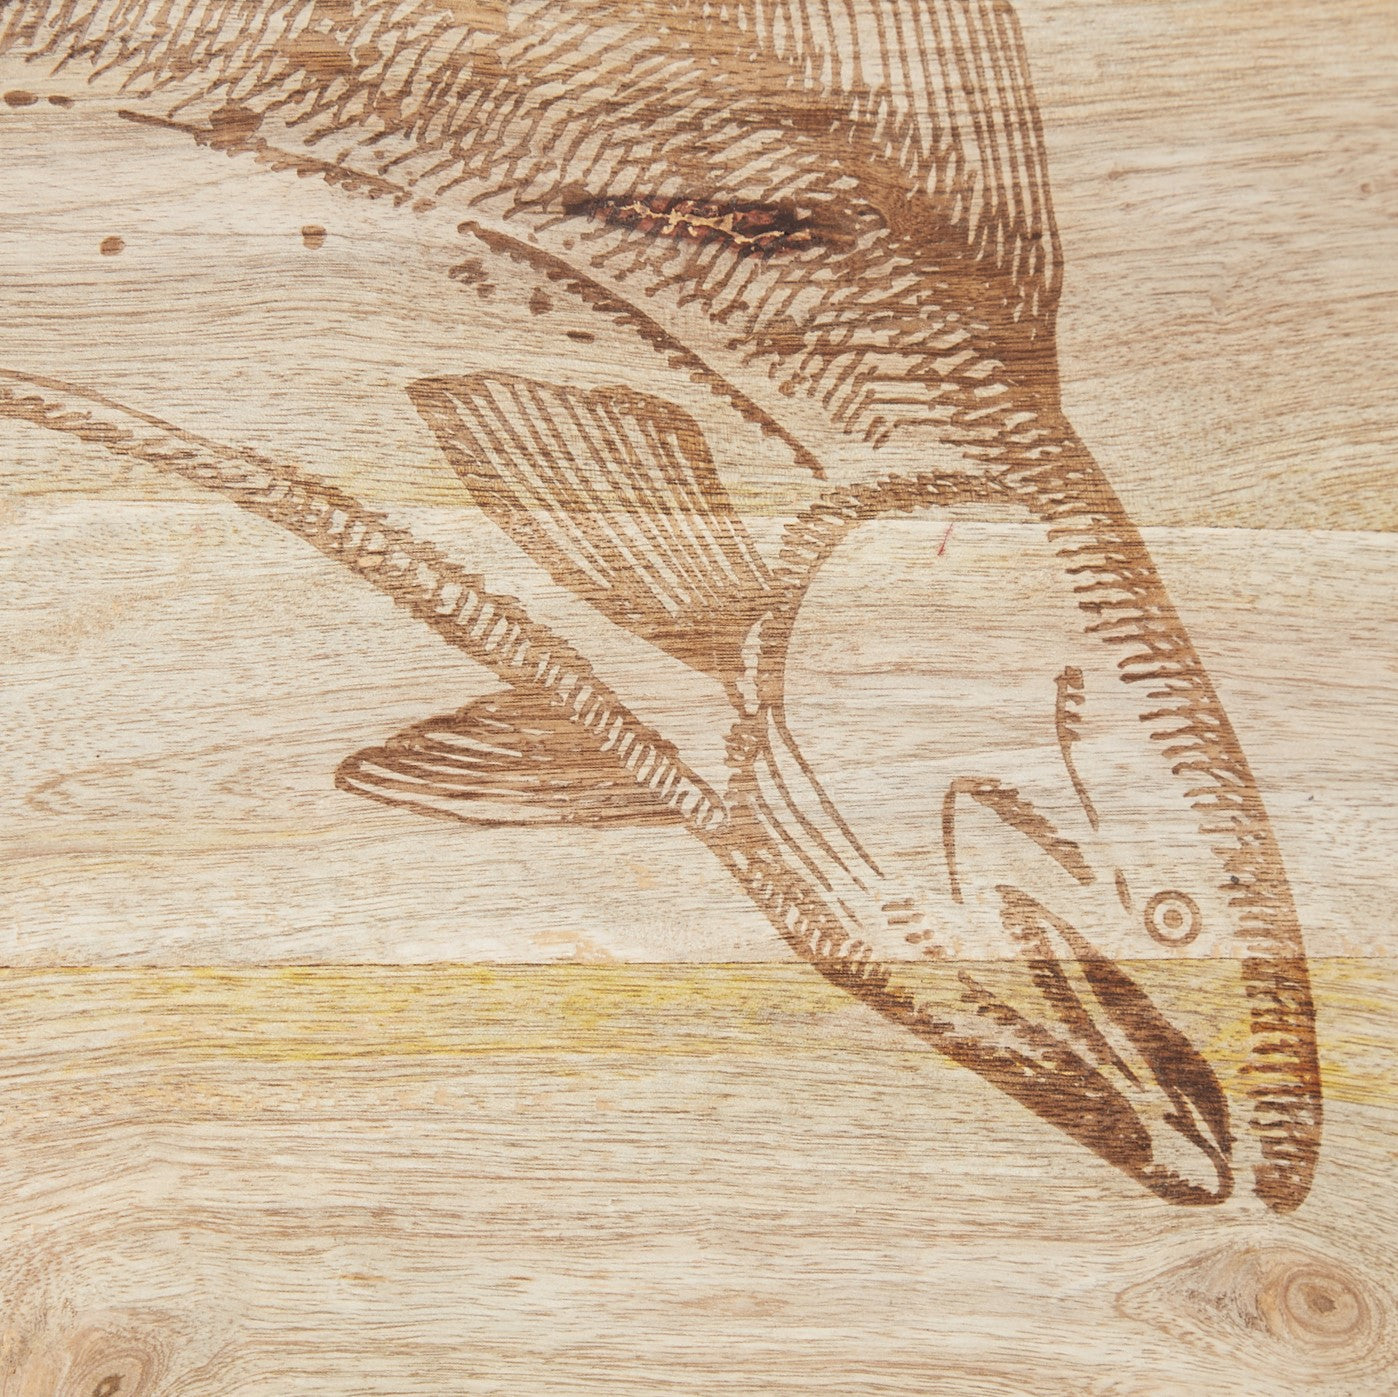 Fish Etched Wood Chopping Board